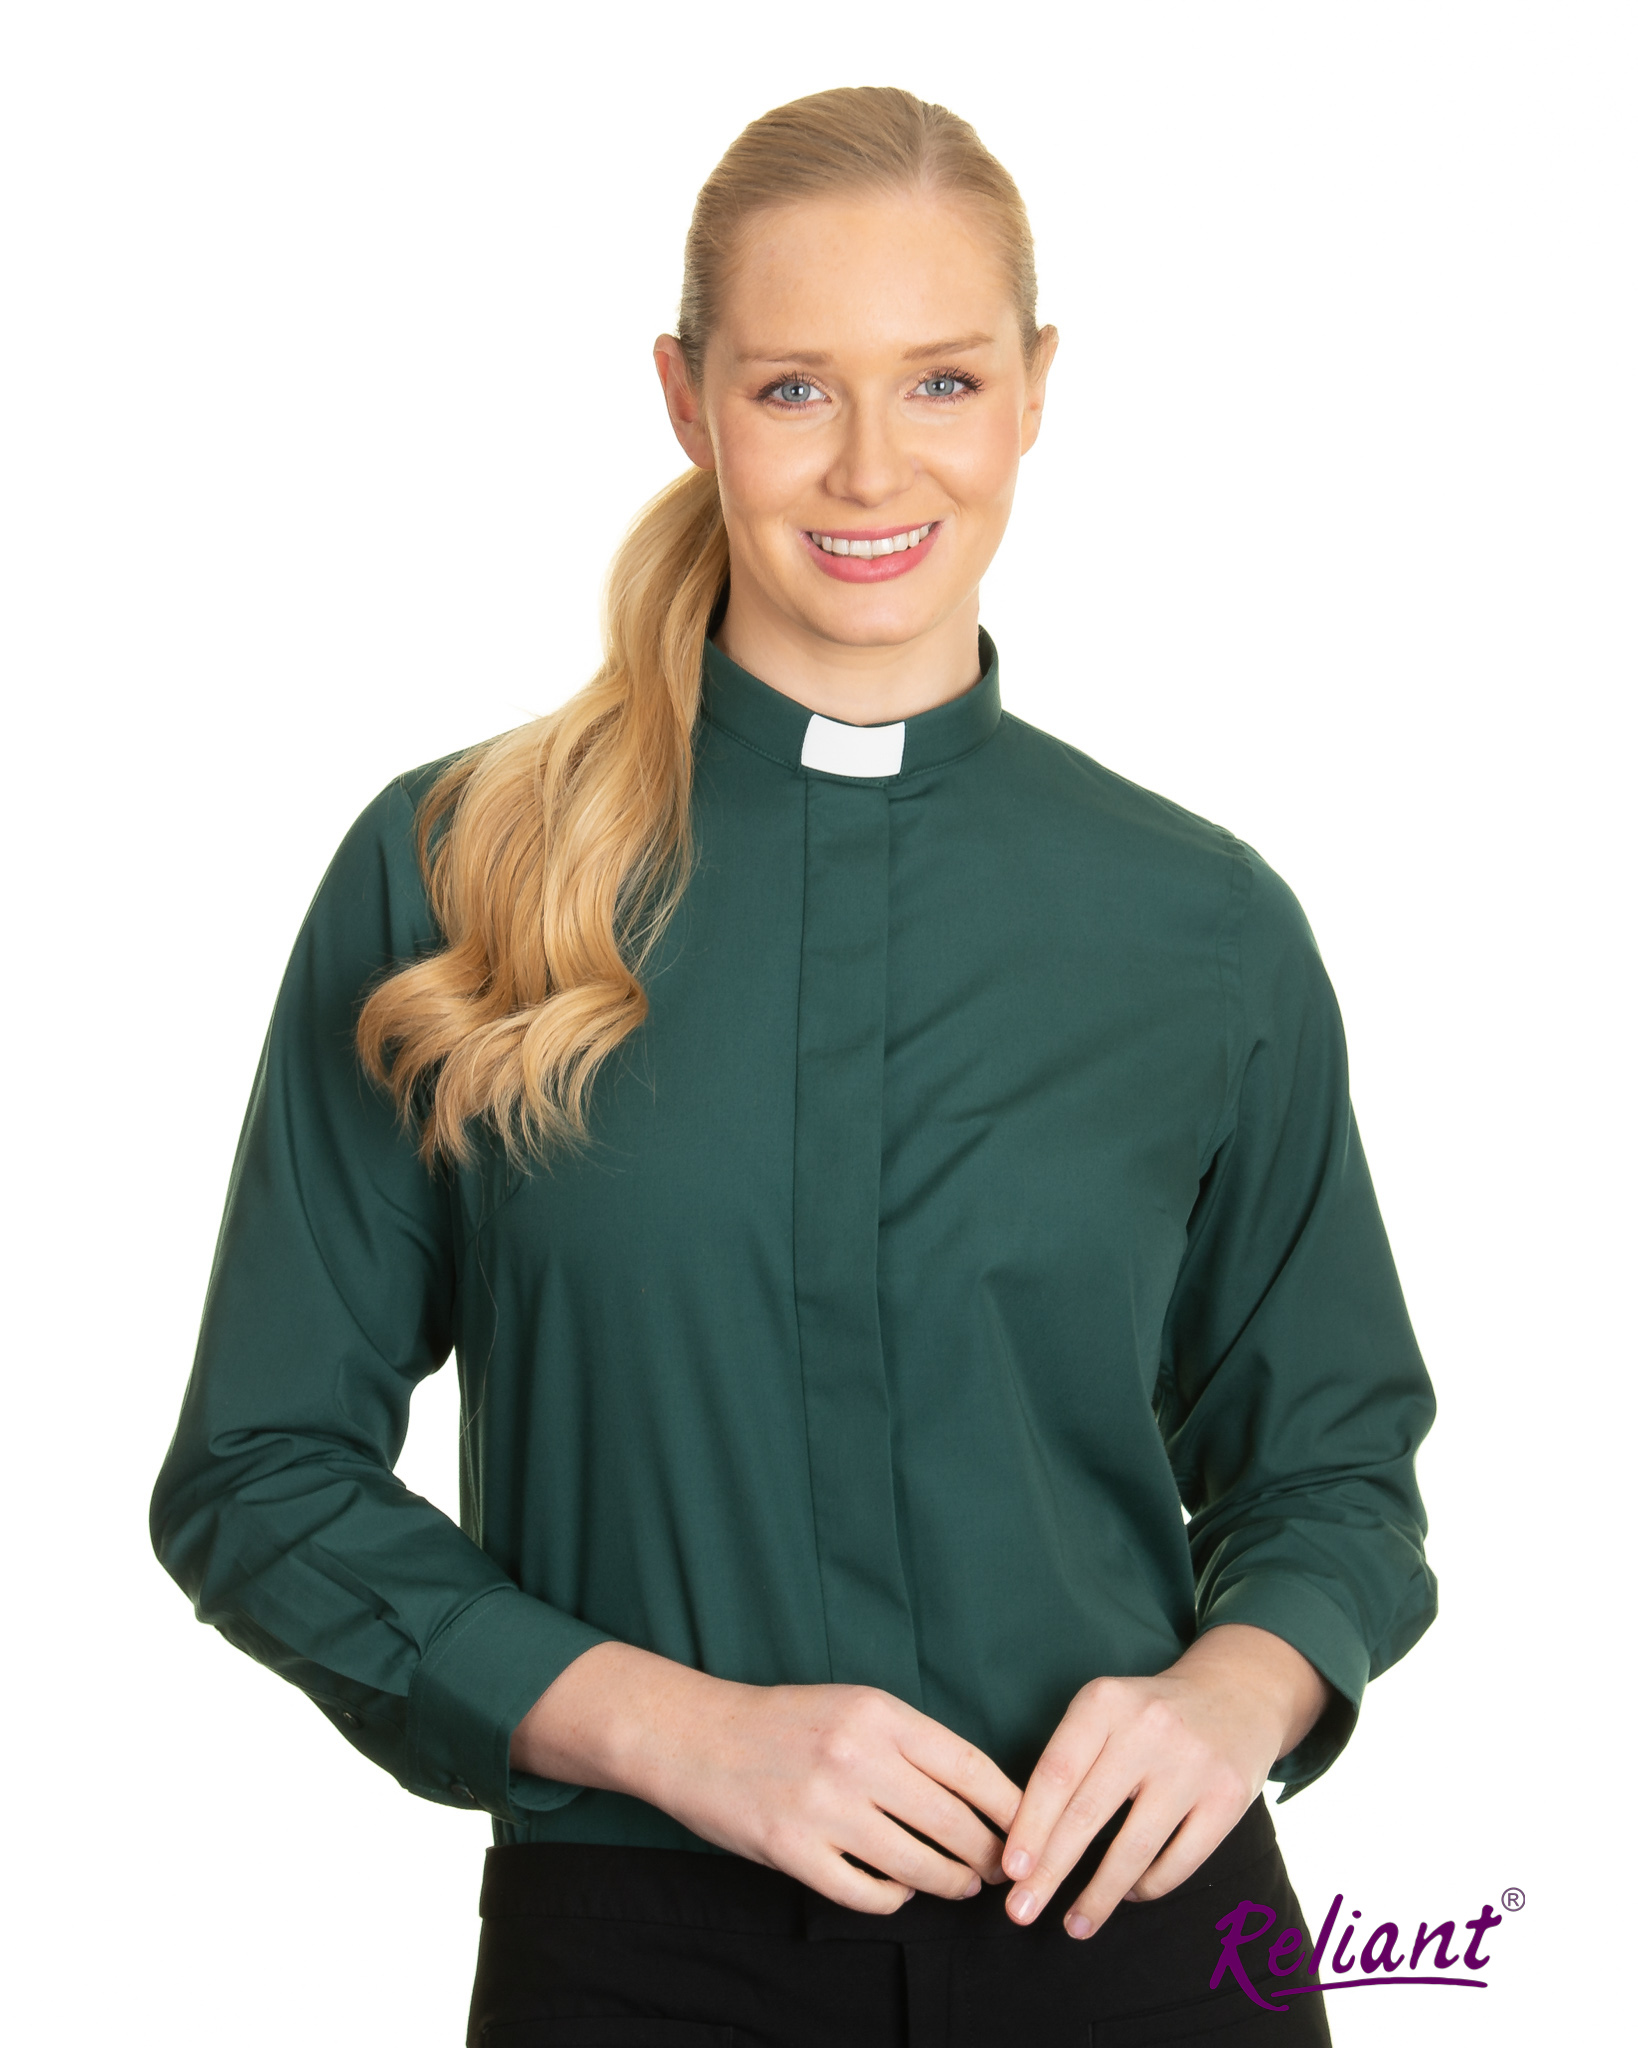 Women's 1in Tunnel Collar Long Sleeve Clerical Shirt - Green | Reliant ...